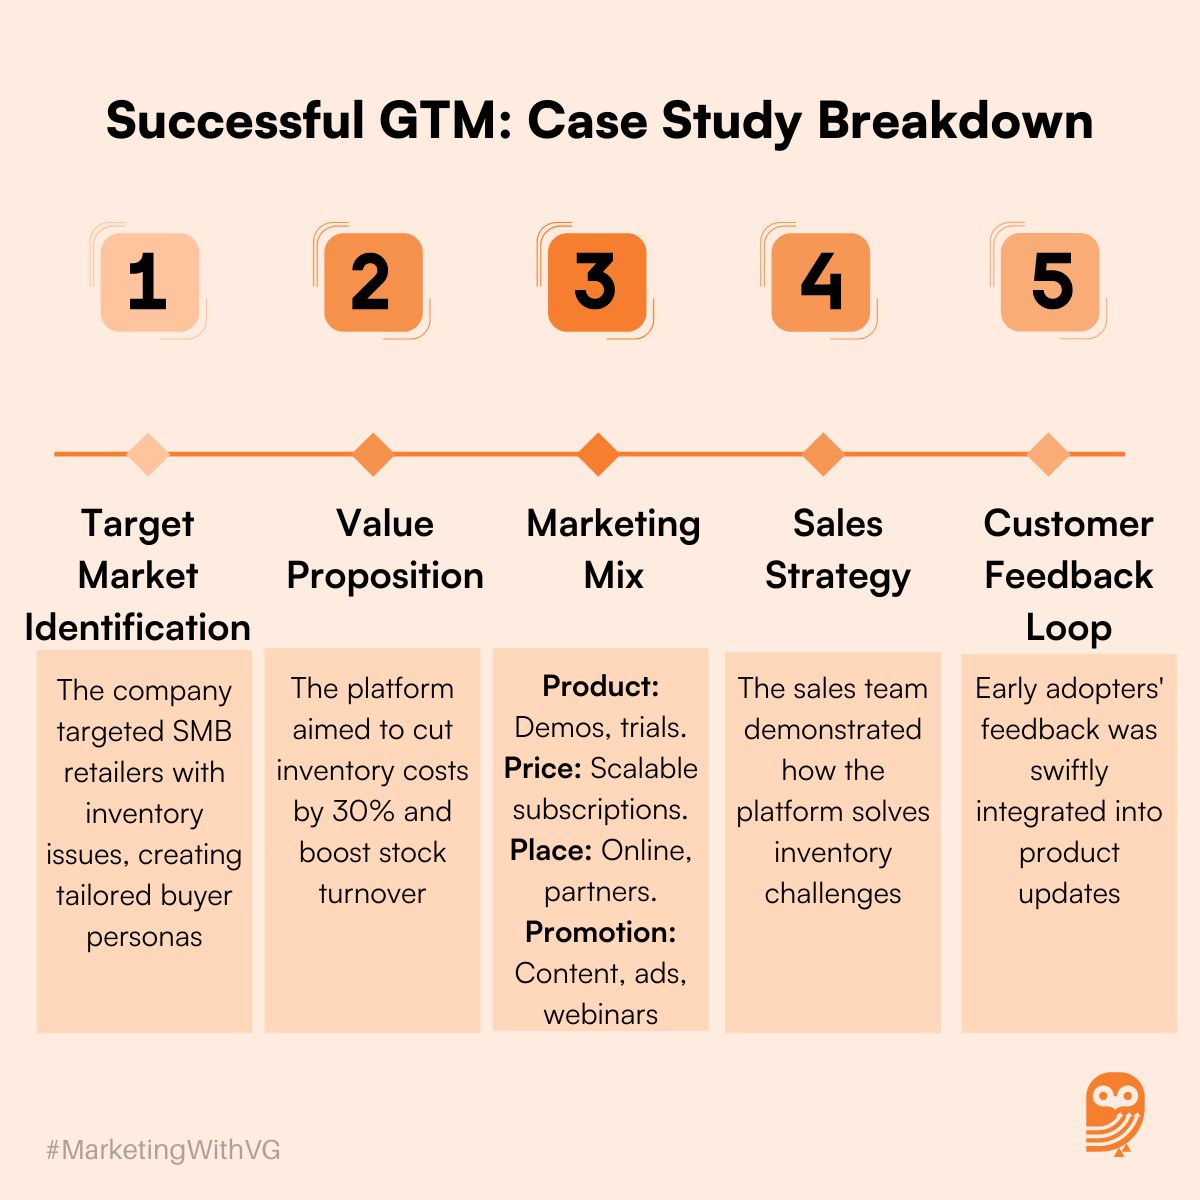 Breakdown of successful GTM case study example